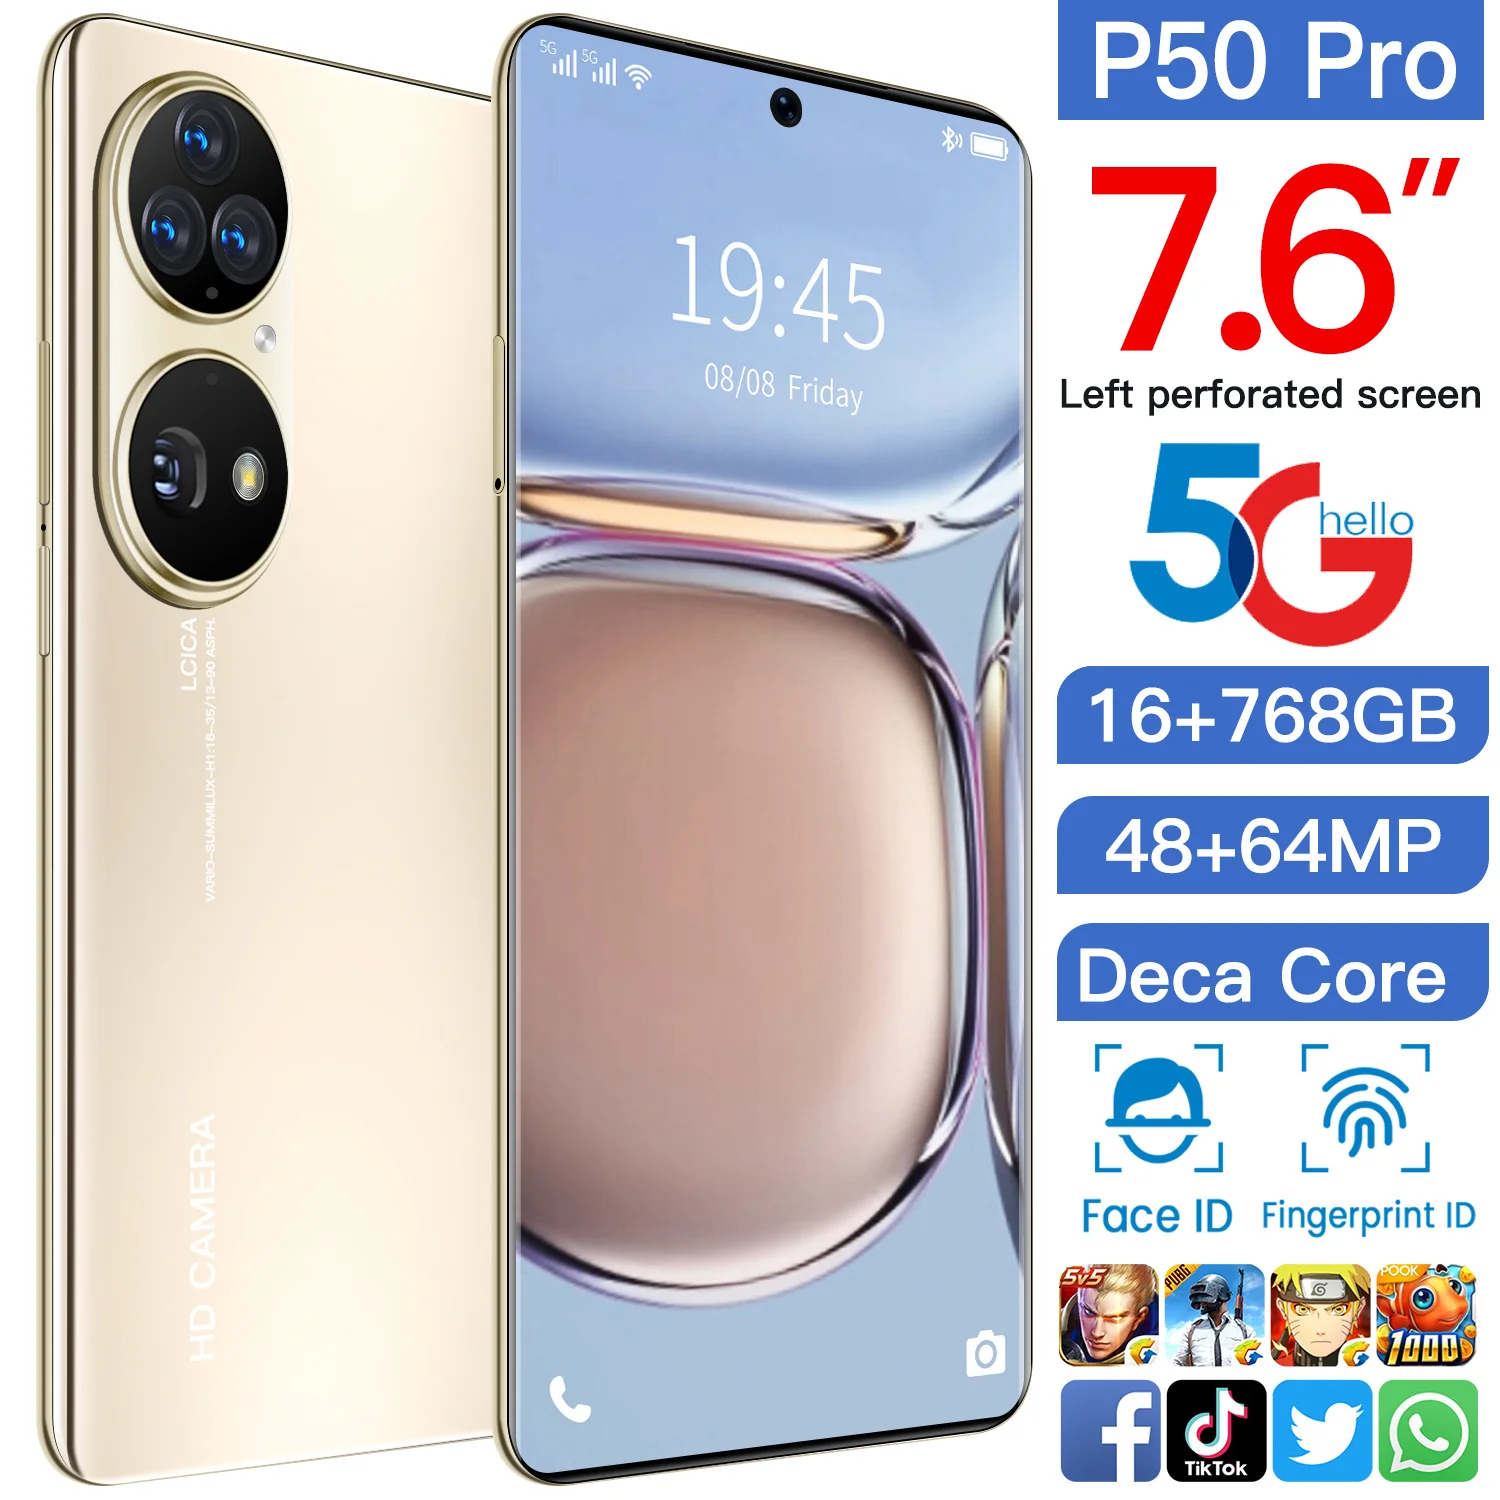 Smartphone P50 Pro 16GB RAM 768GB ROM 7.6 Inch Perforated HD Screen Global Version Smart Phone Android 11 Unlocked Mobile Phones